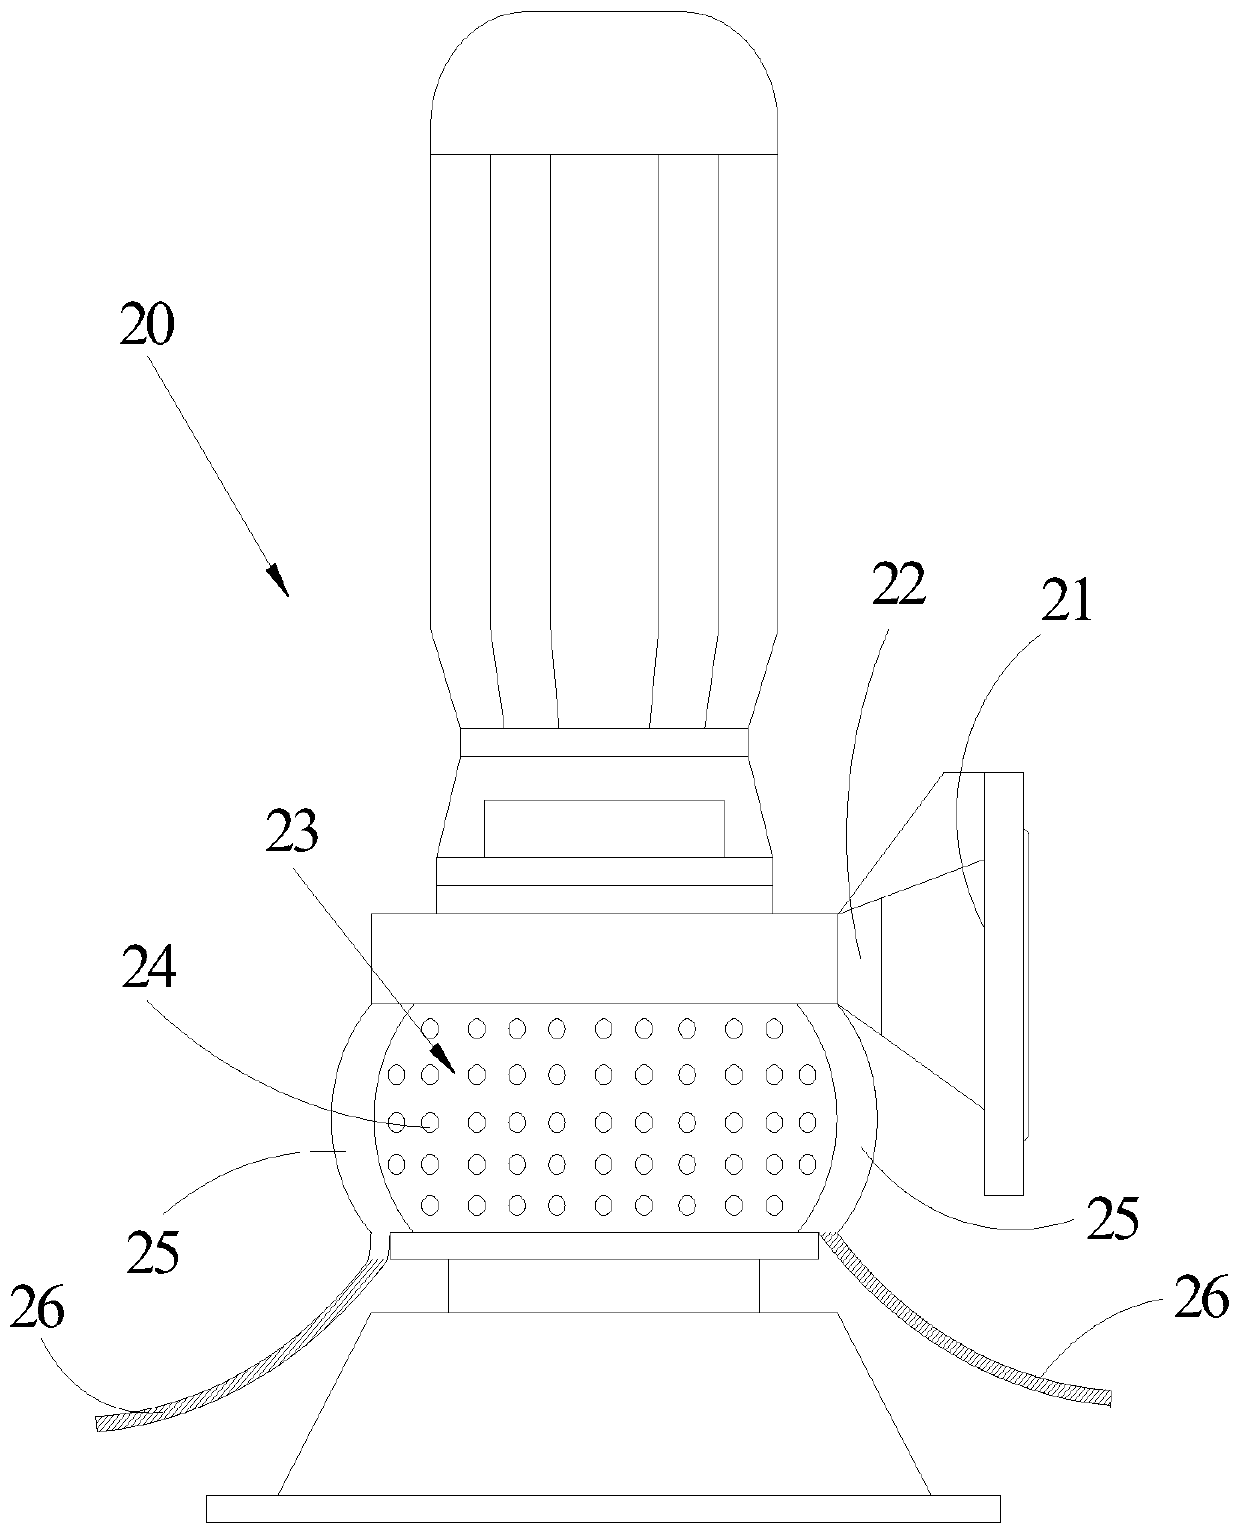 Secondary hole clearing method of cast-in-place pile